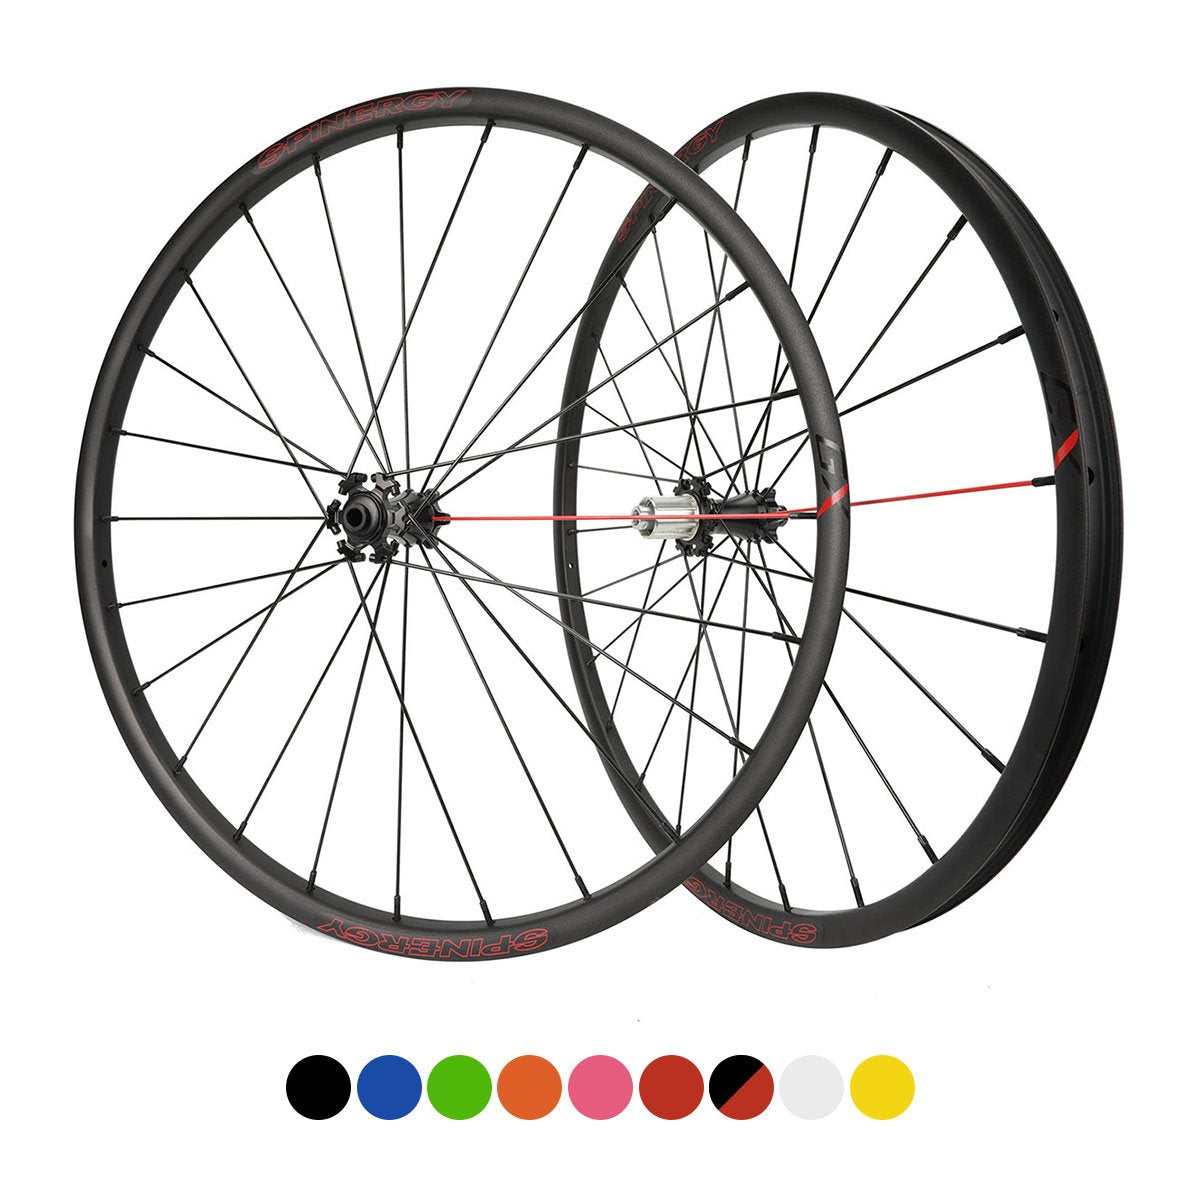 SPINERGY GX Alloy 700c Front & Rear Wheel Set for Gravel/CX